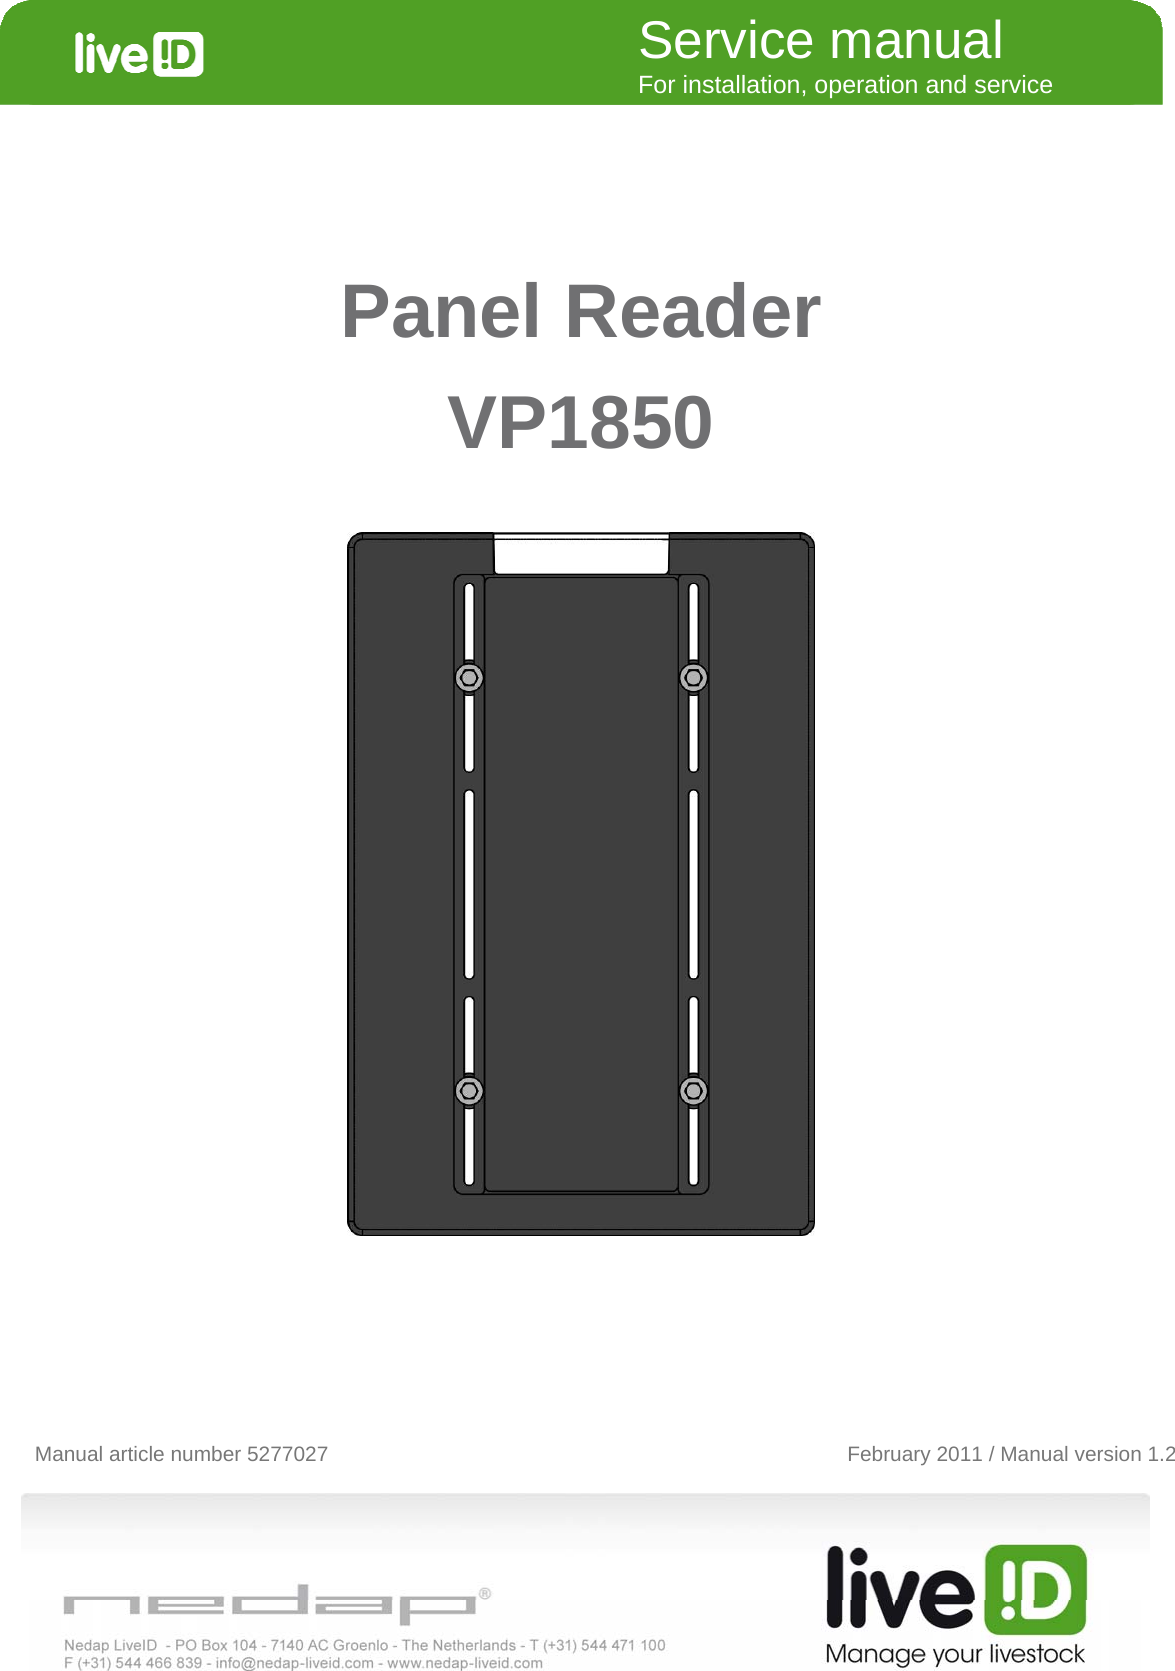   Panel Reader  VP1850            Manual article number 5277027               February 2011 / Manual version 1.2Service manual For installation, operation and service 